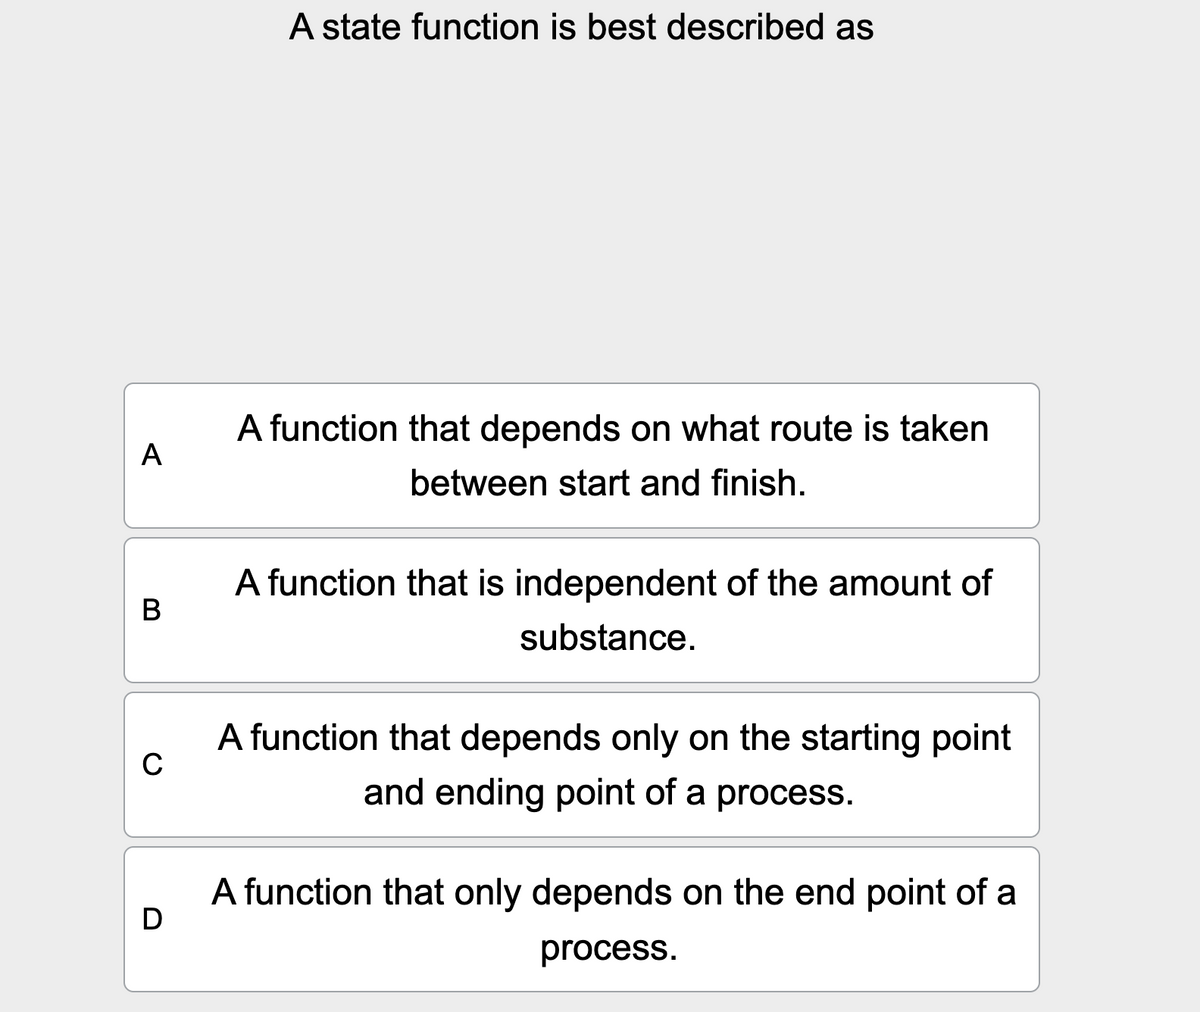 A state function is best described as
A
B
C
D
A function that depends on what route is taken
between start and finish.
A function that is independent of the amount of
substance.
A function that depends only on the starting point
and ending point of a process.
A function that only depends on the end point of a
process.